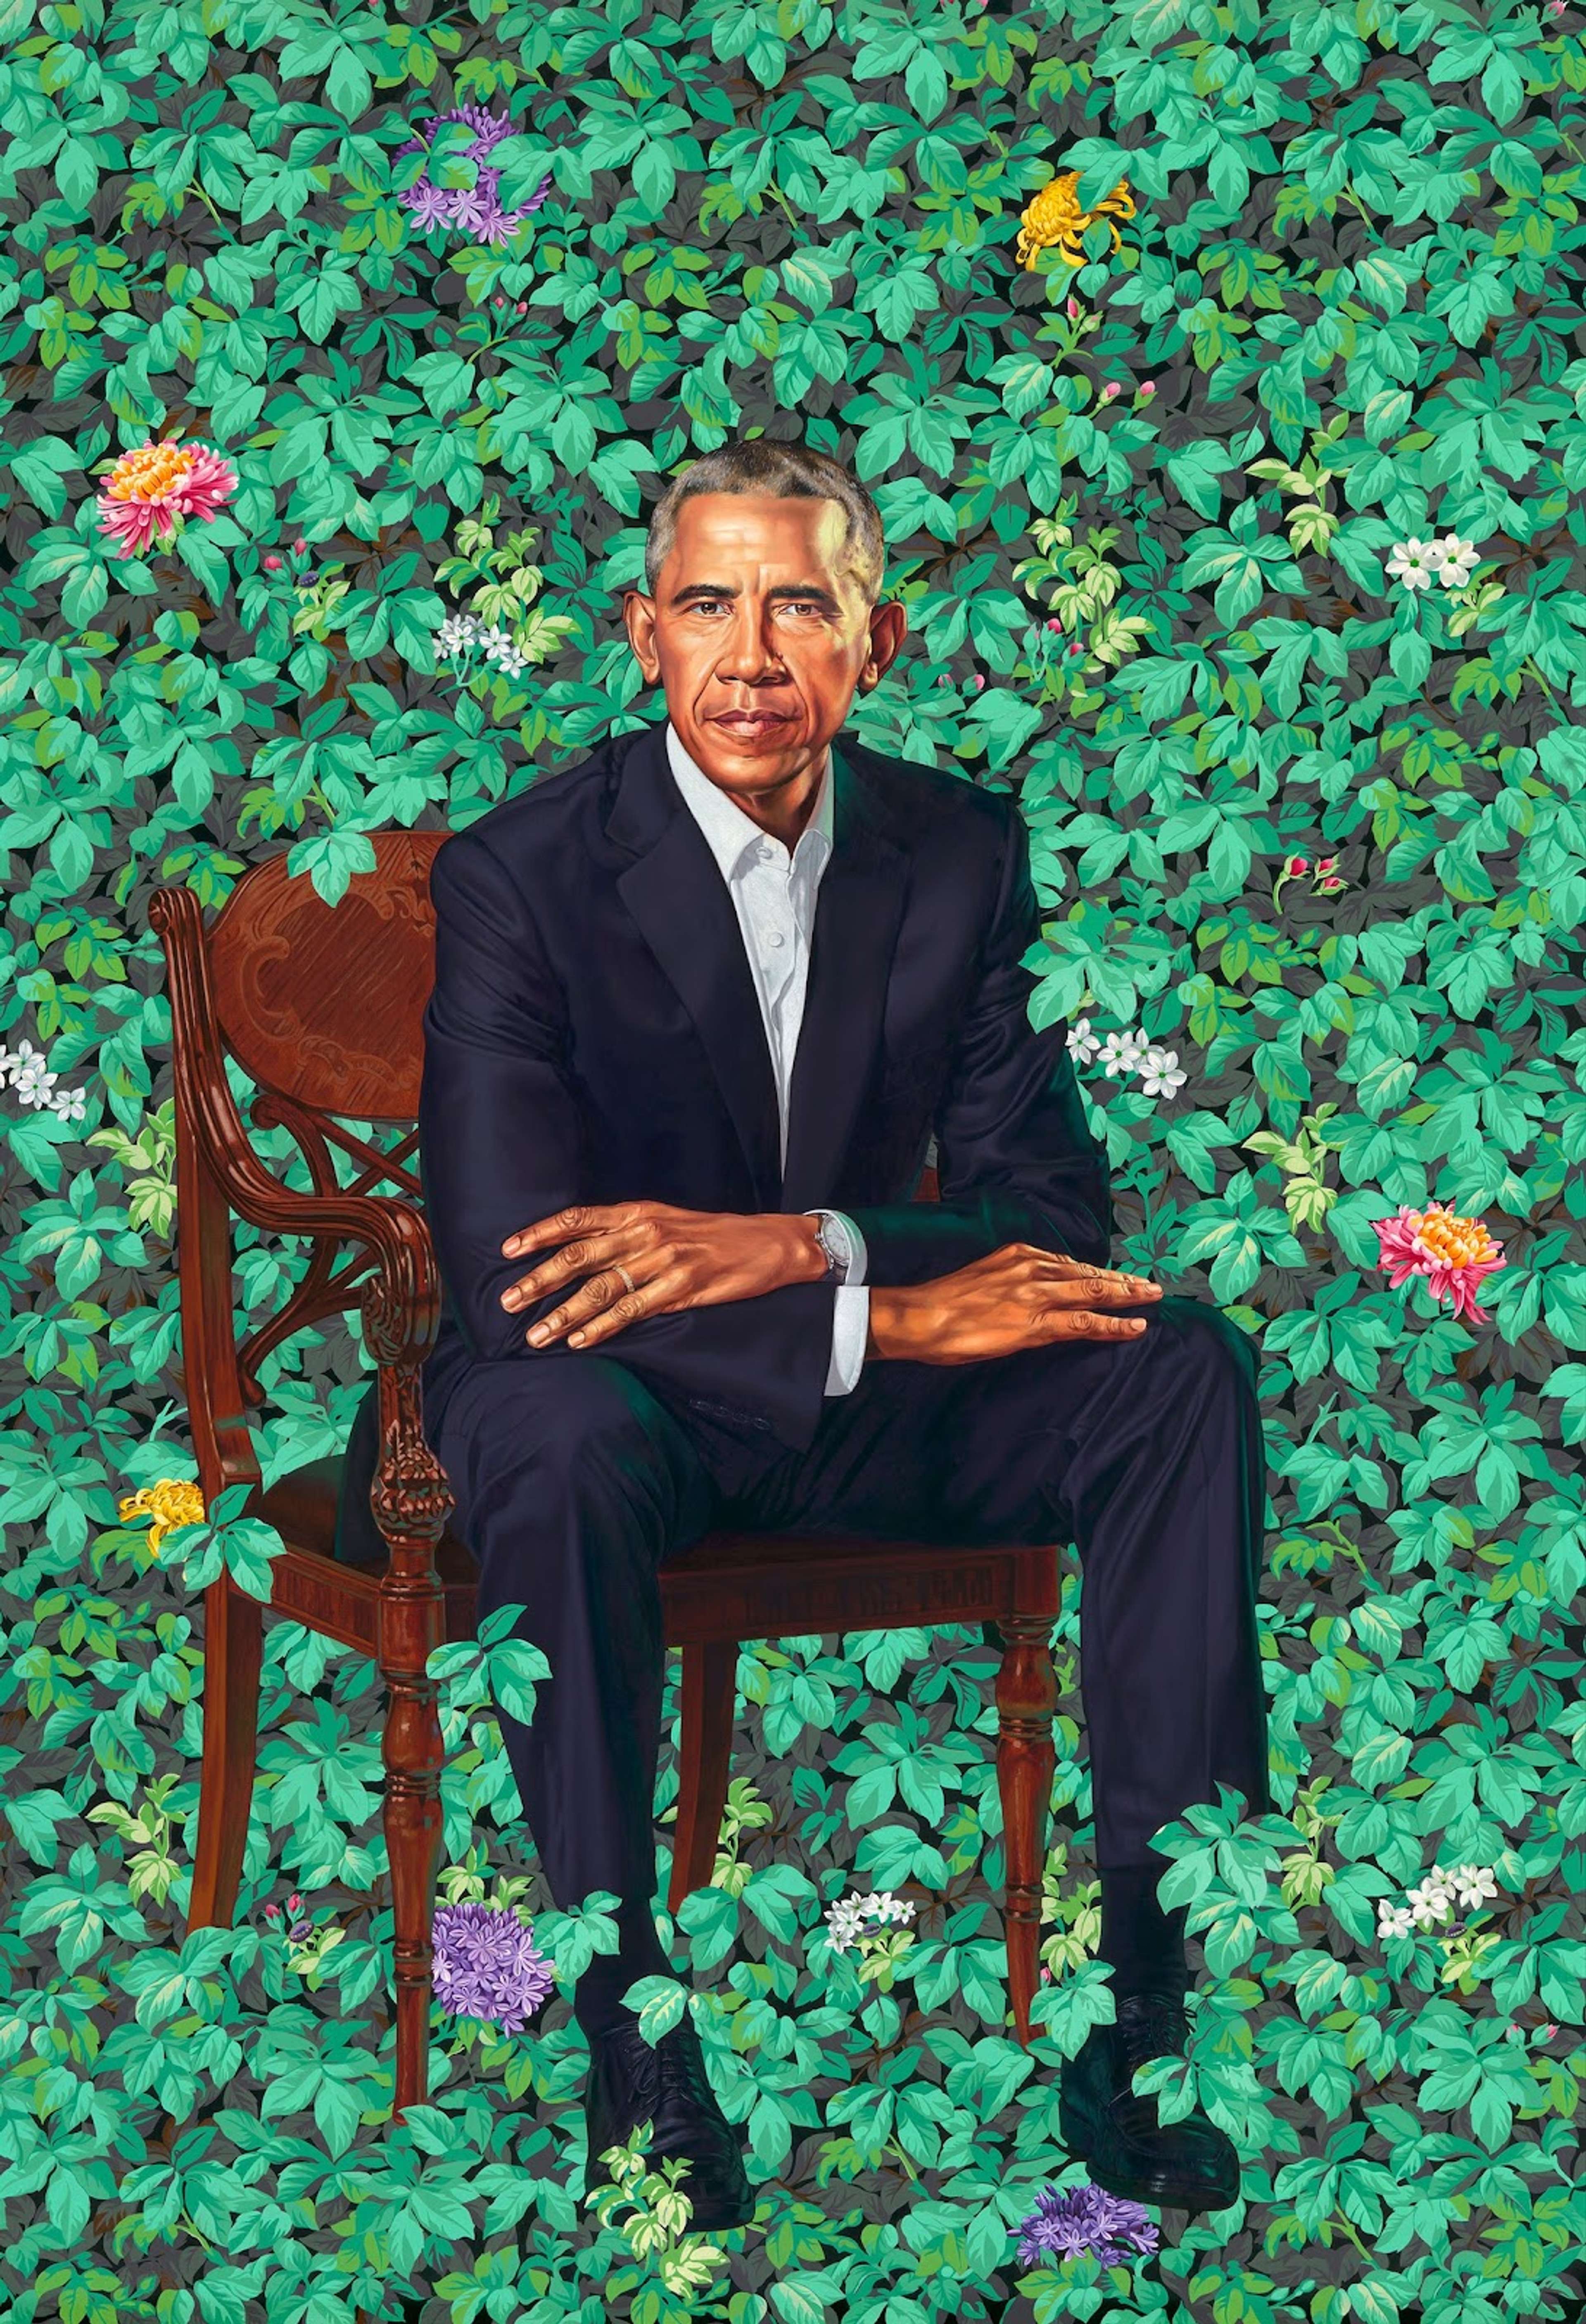 A large-scale portrait titled "Portrait of Barack Obama" by Kehinde Wiley, 2018, depicting the former US President seated in a chair against a backdrop of lush green foliage, wearing a suit and tie, with folded arms and a serious expression on his face.